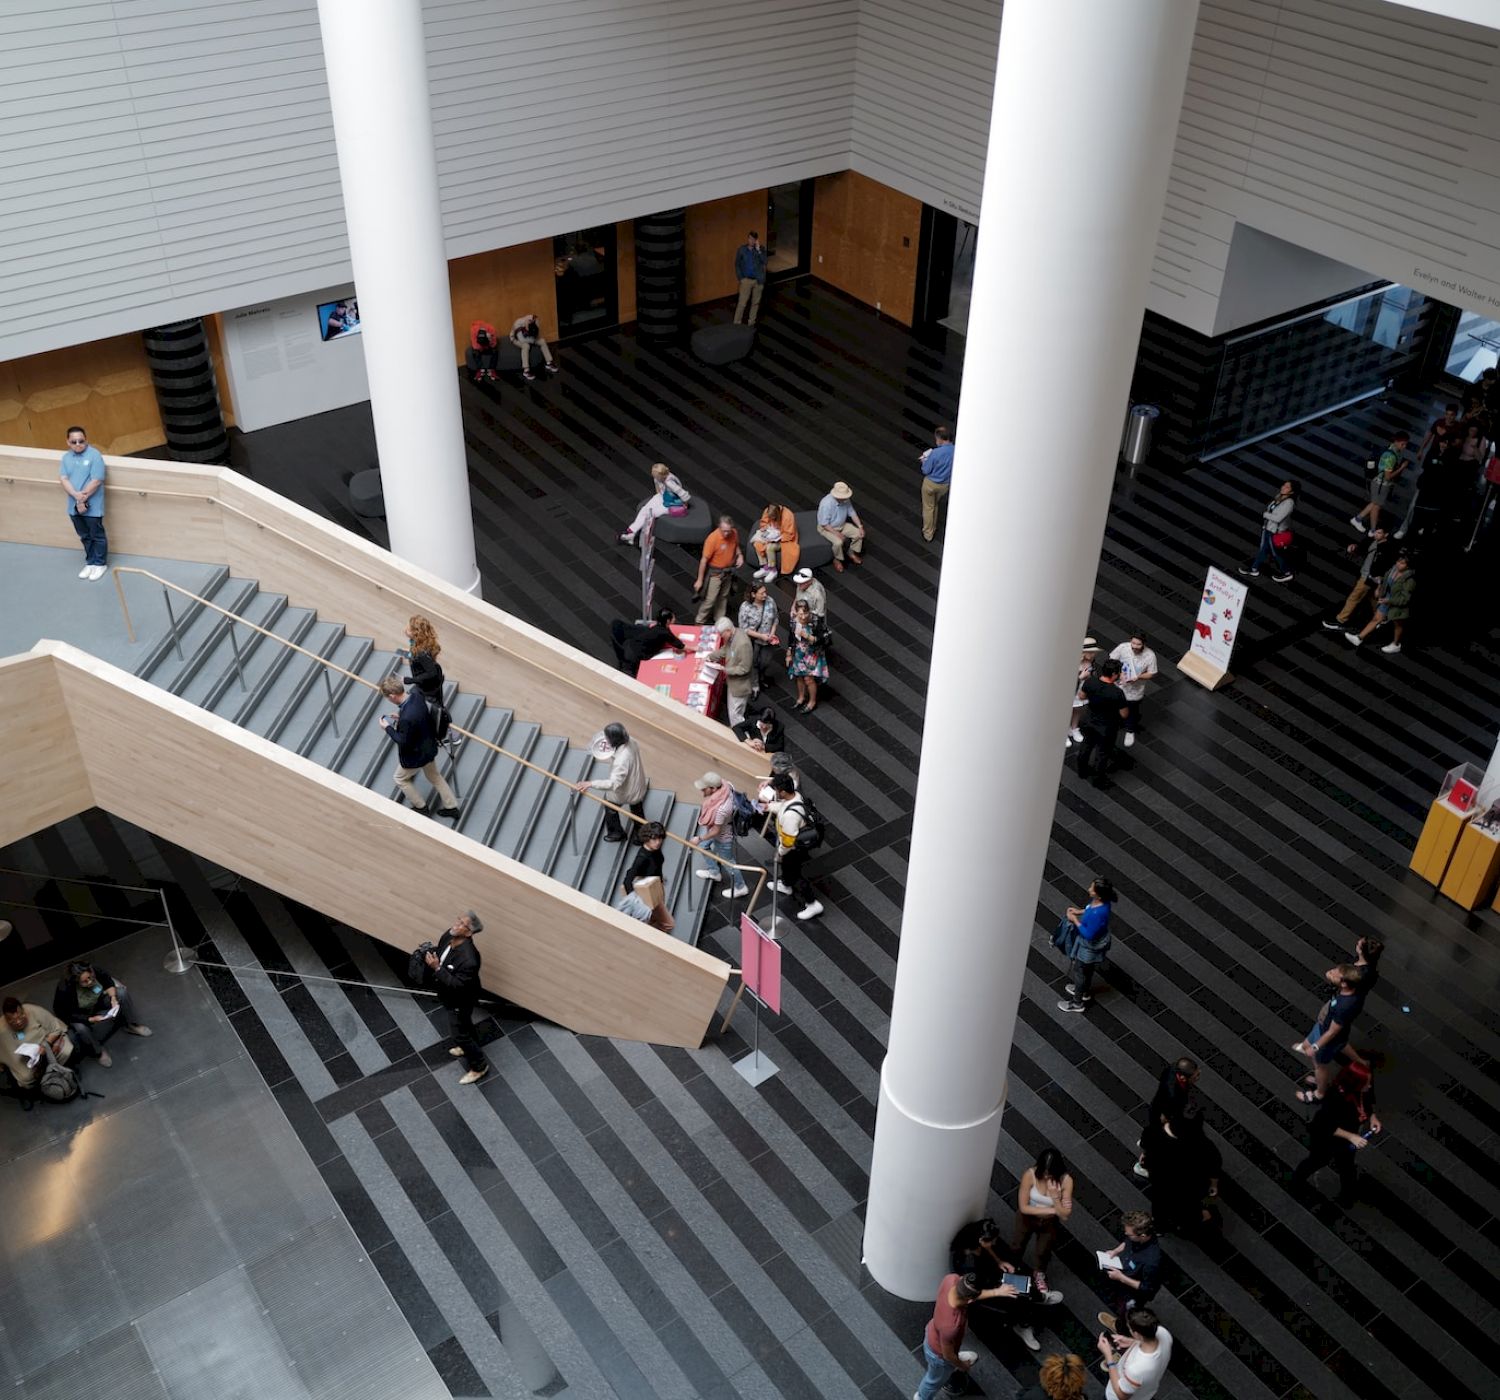 People walking in a spacious indoor area with tall columns, a staircase, and striped flooring, some sitting, others moving around.